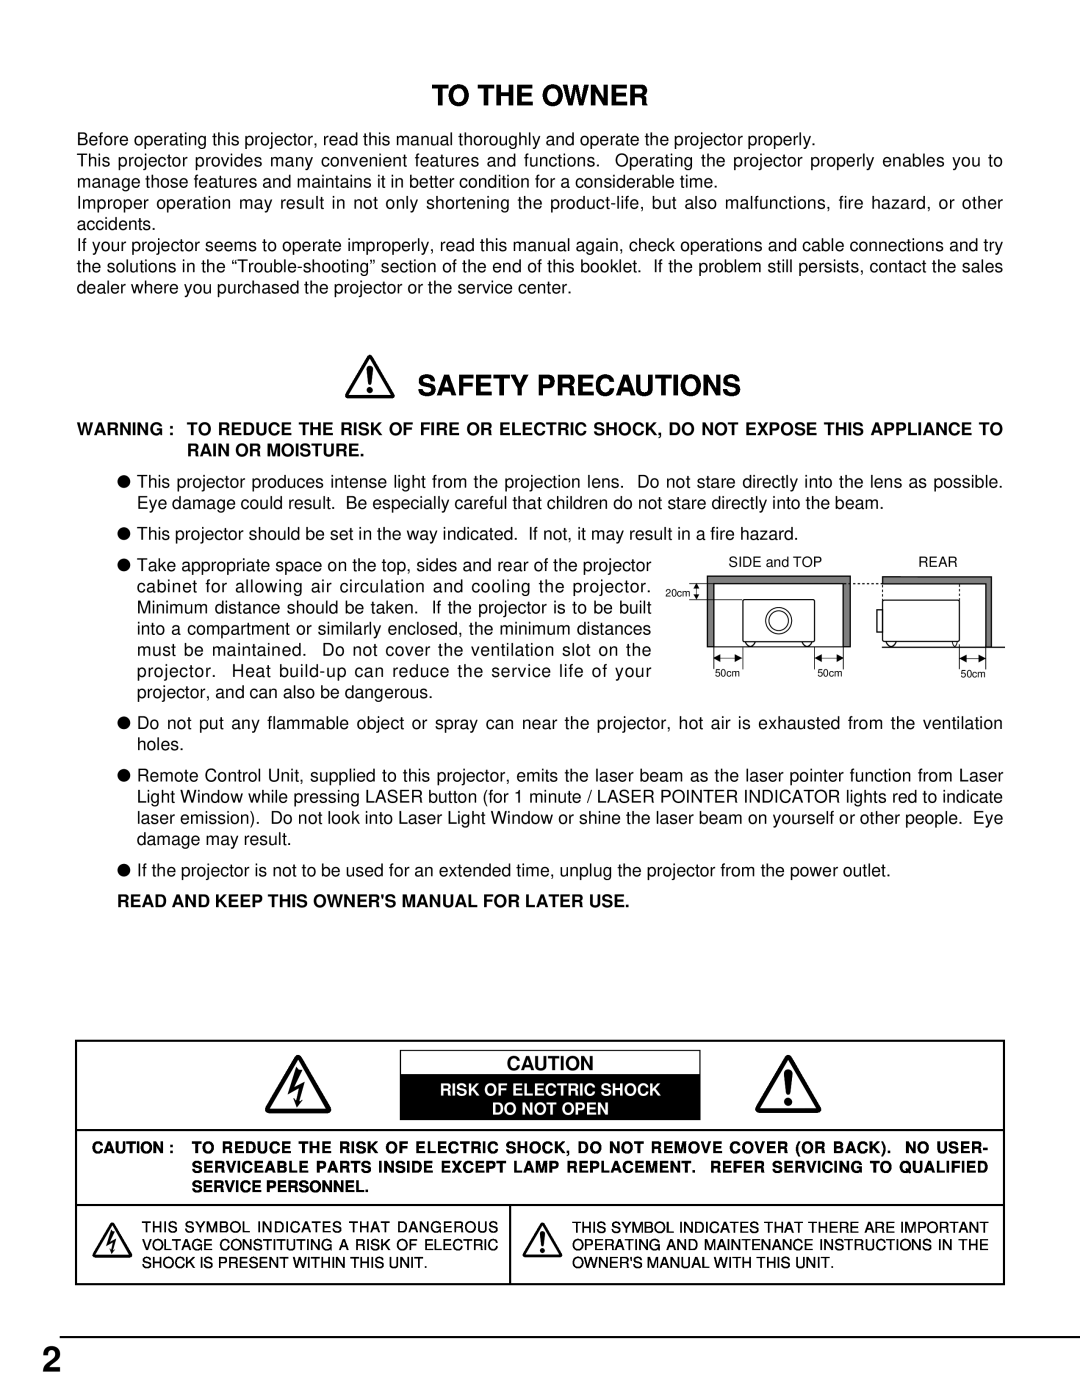 Eiki LC-X1000 instruction manual To The Owner, Safety Precautions 